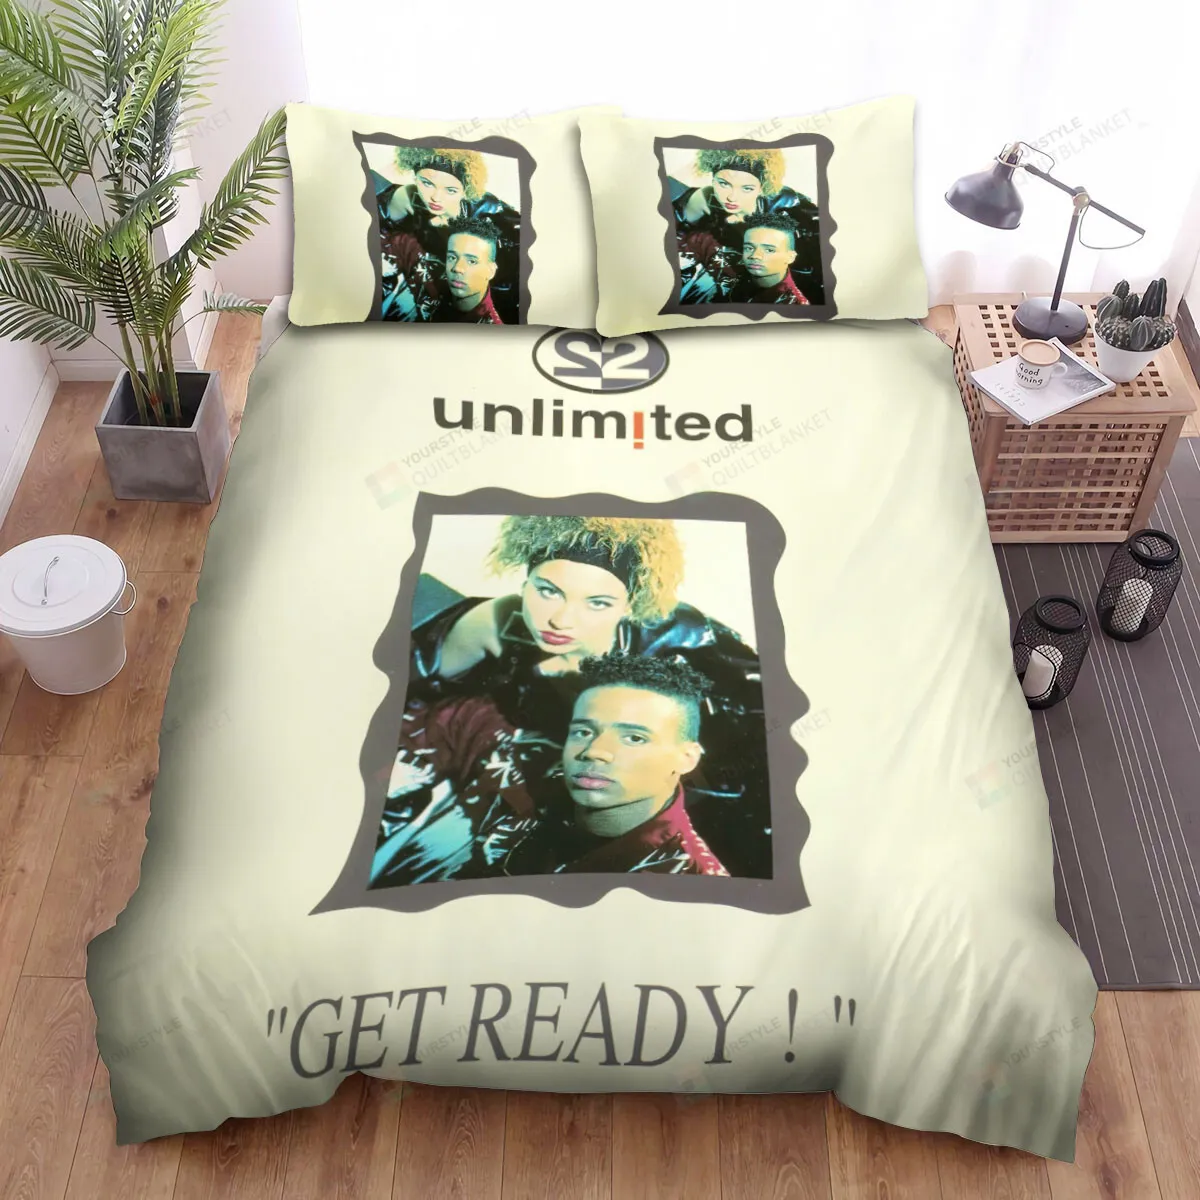 2 Unlimited Get Ready Bed Sheets Spread Comforter Duvet Cover Bedding Sets